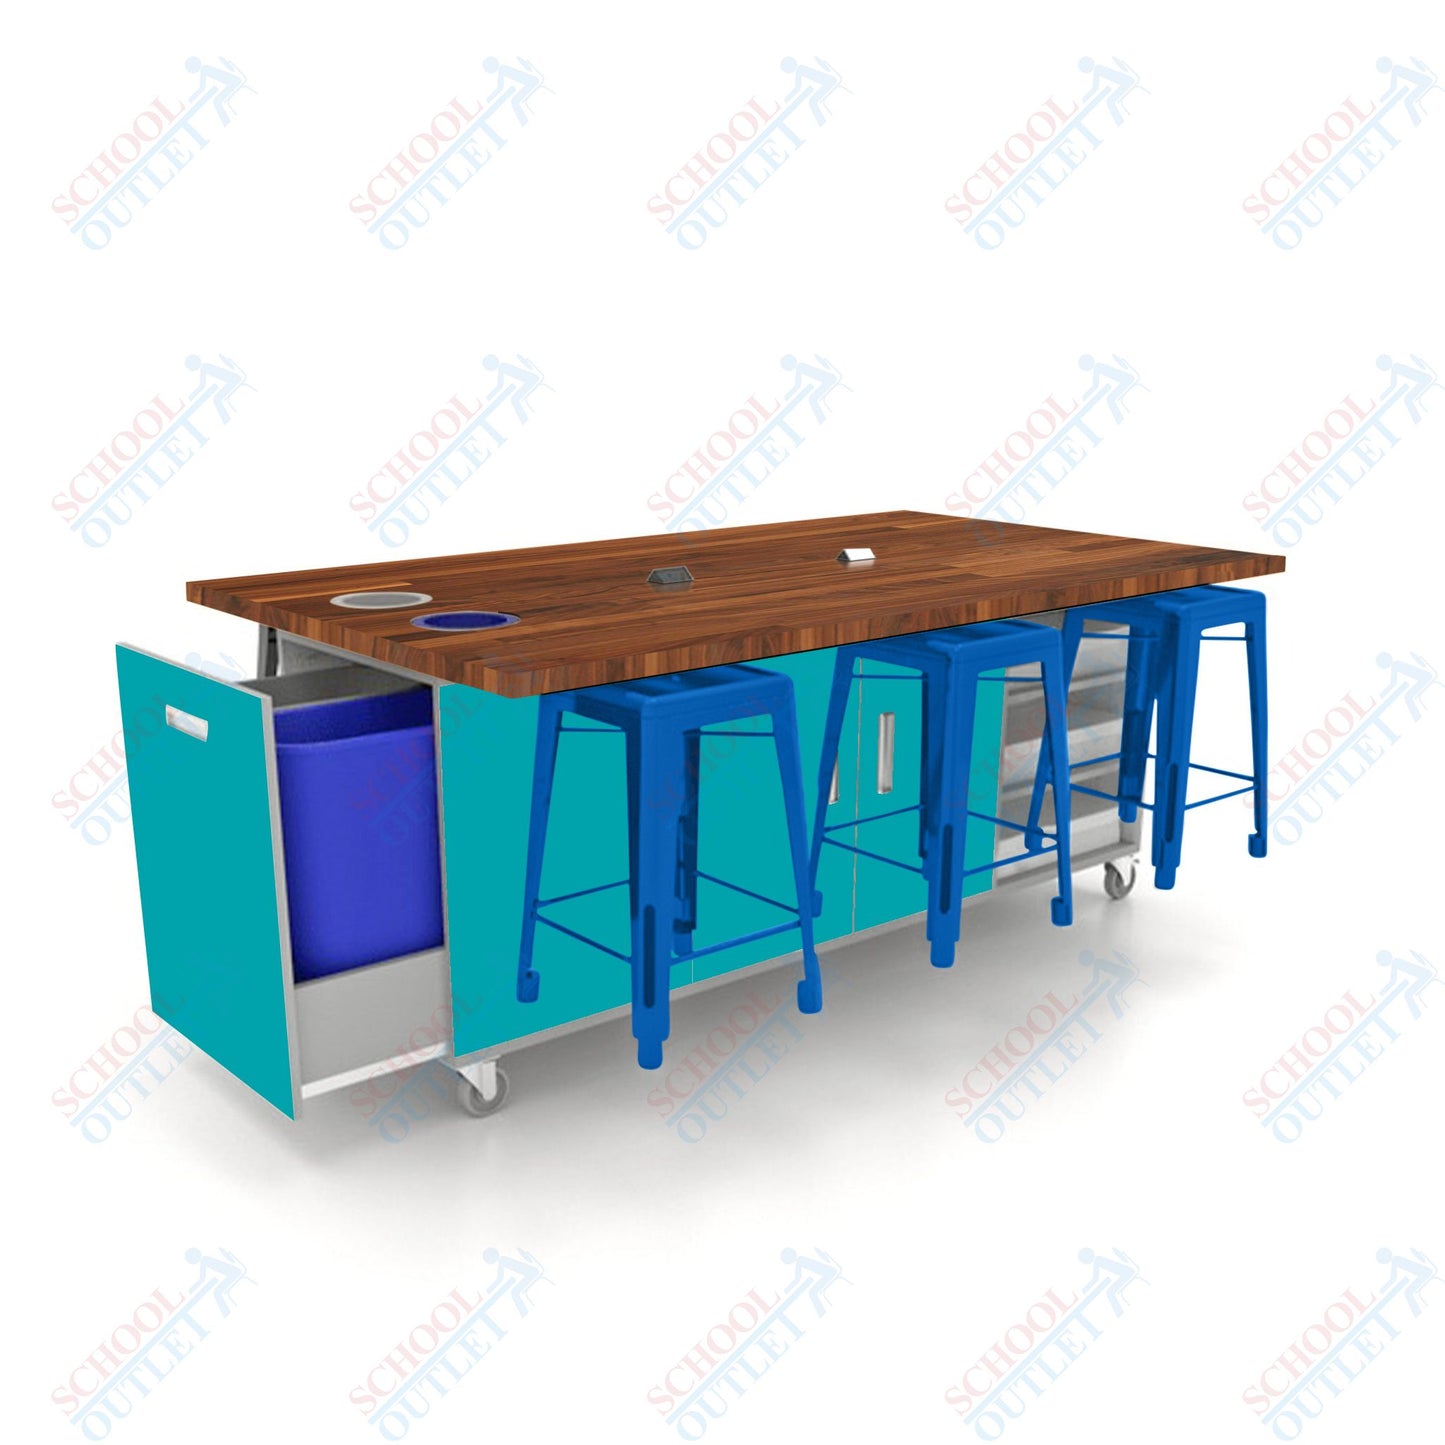 CEF ED Original Table 36"H Butcher Block Top, Laminate Base with  6 Stools, Storage Bins, Trash Bins, and Electrical Outlets Included.